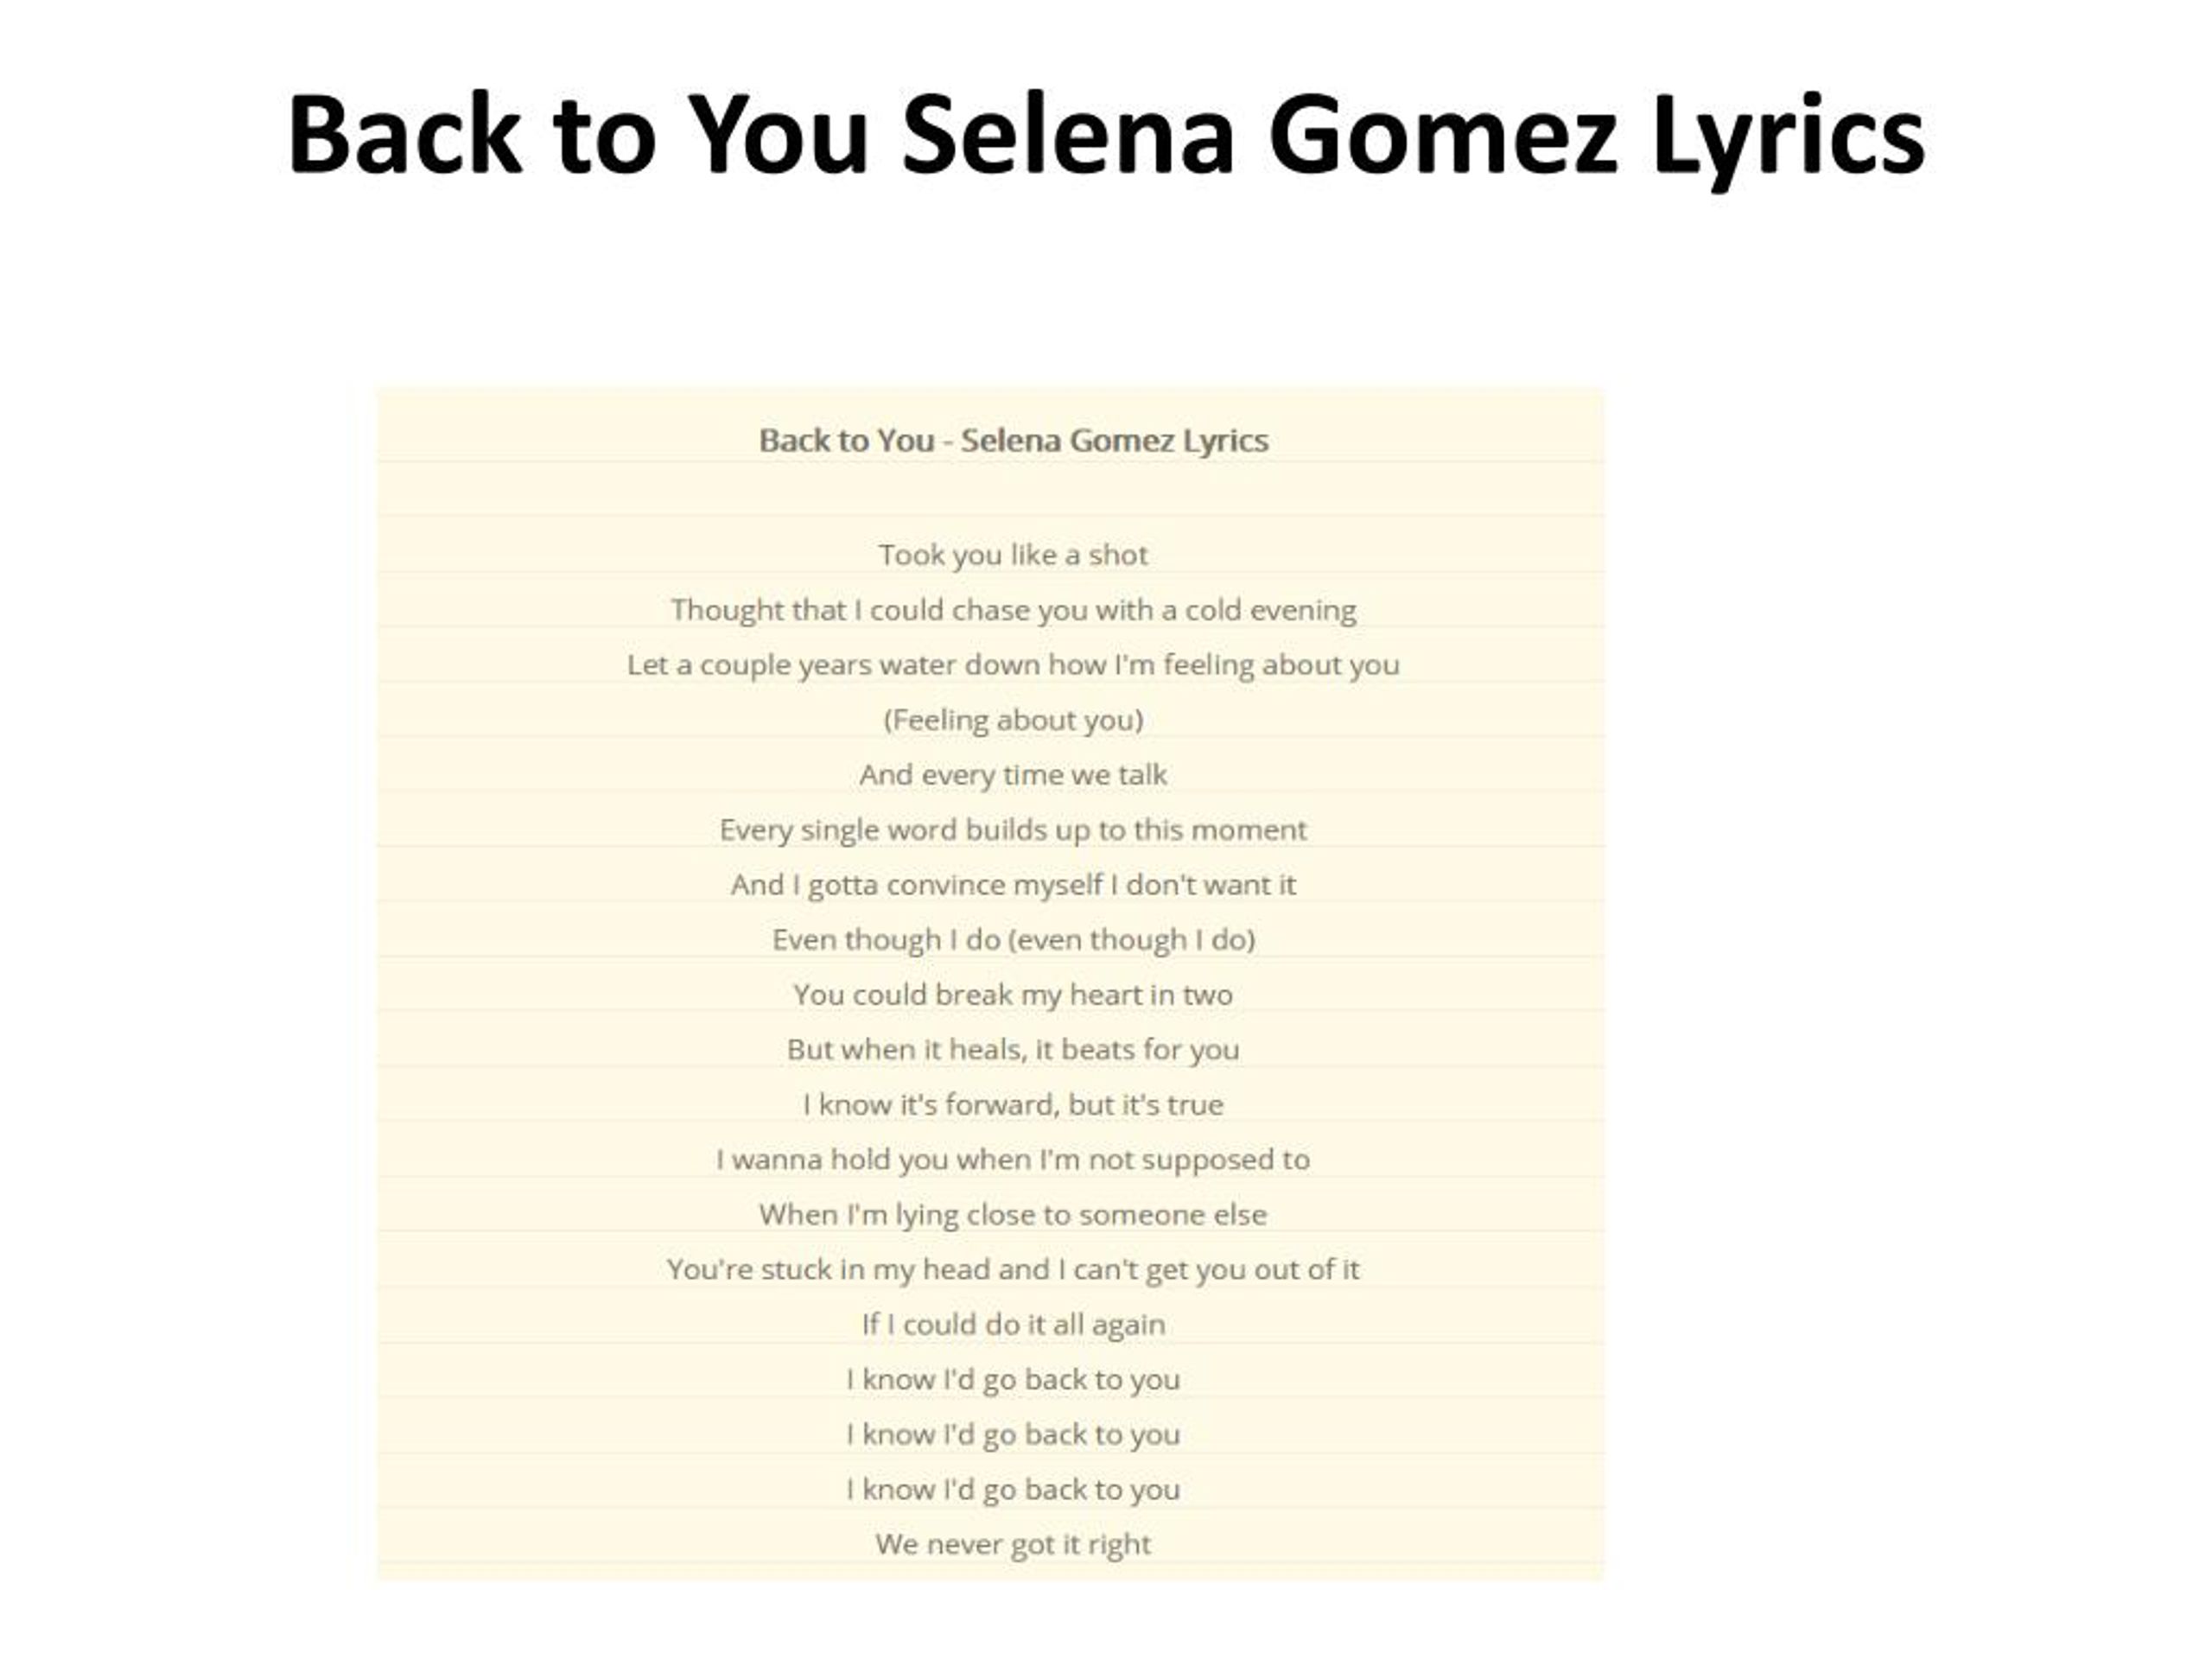 Back to love перевод. Back to you selena текст. Back to you перевод.